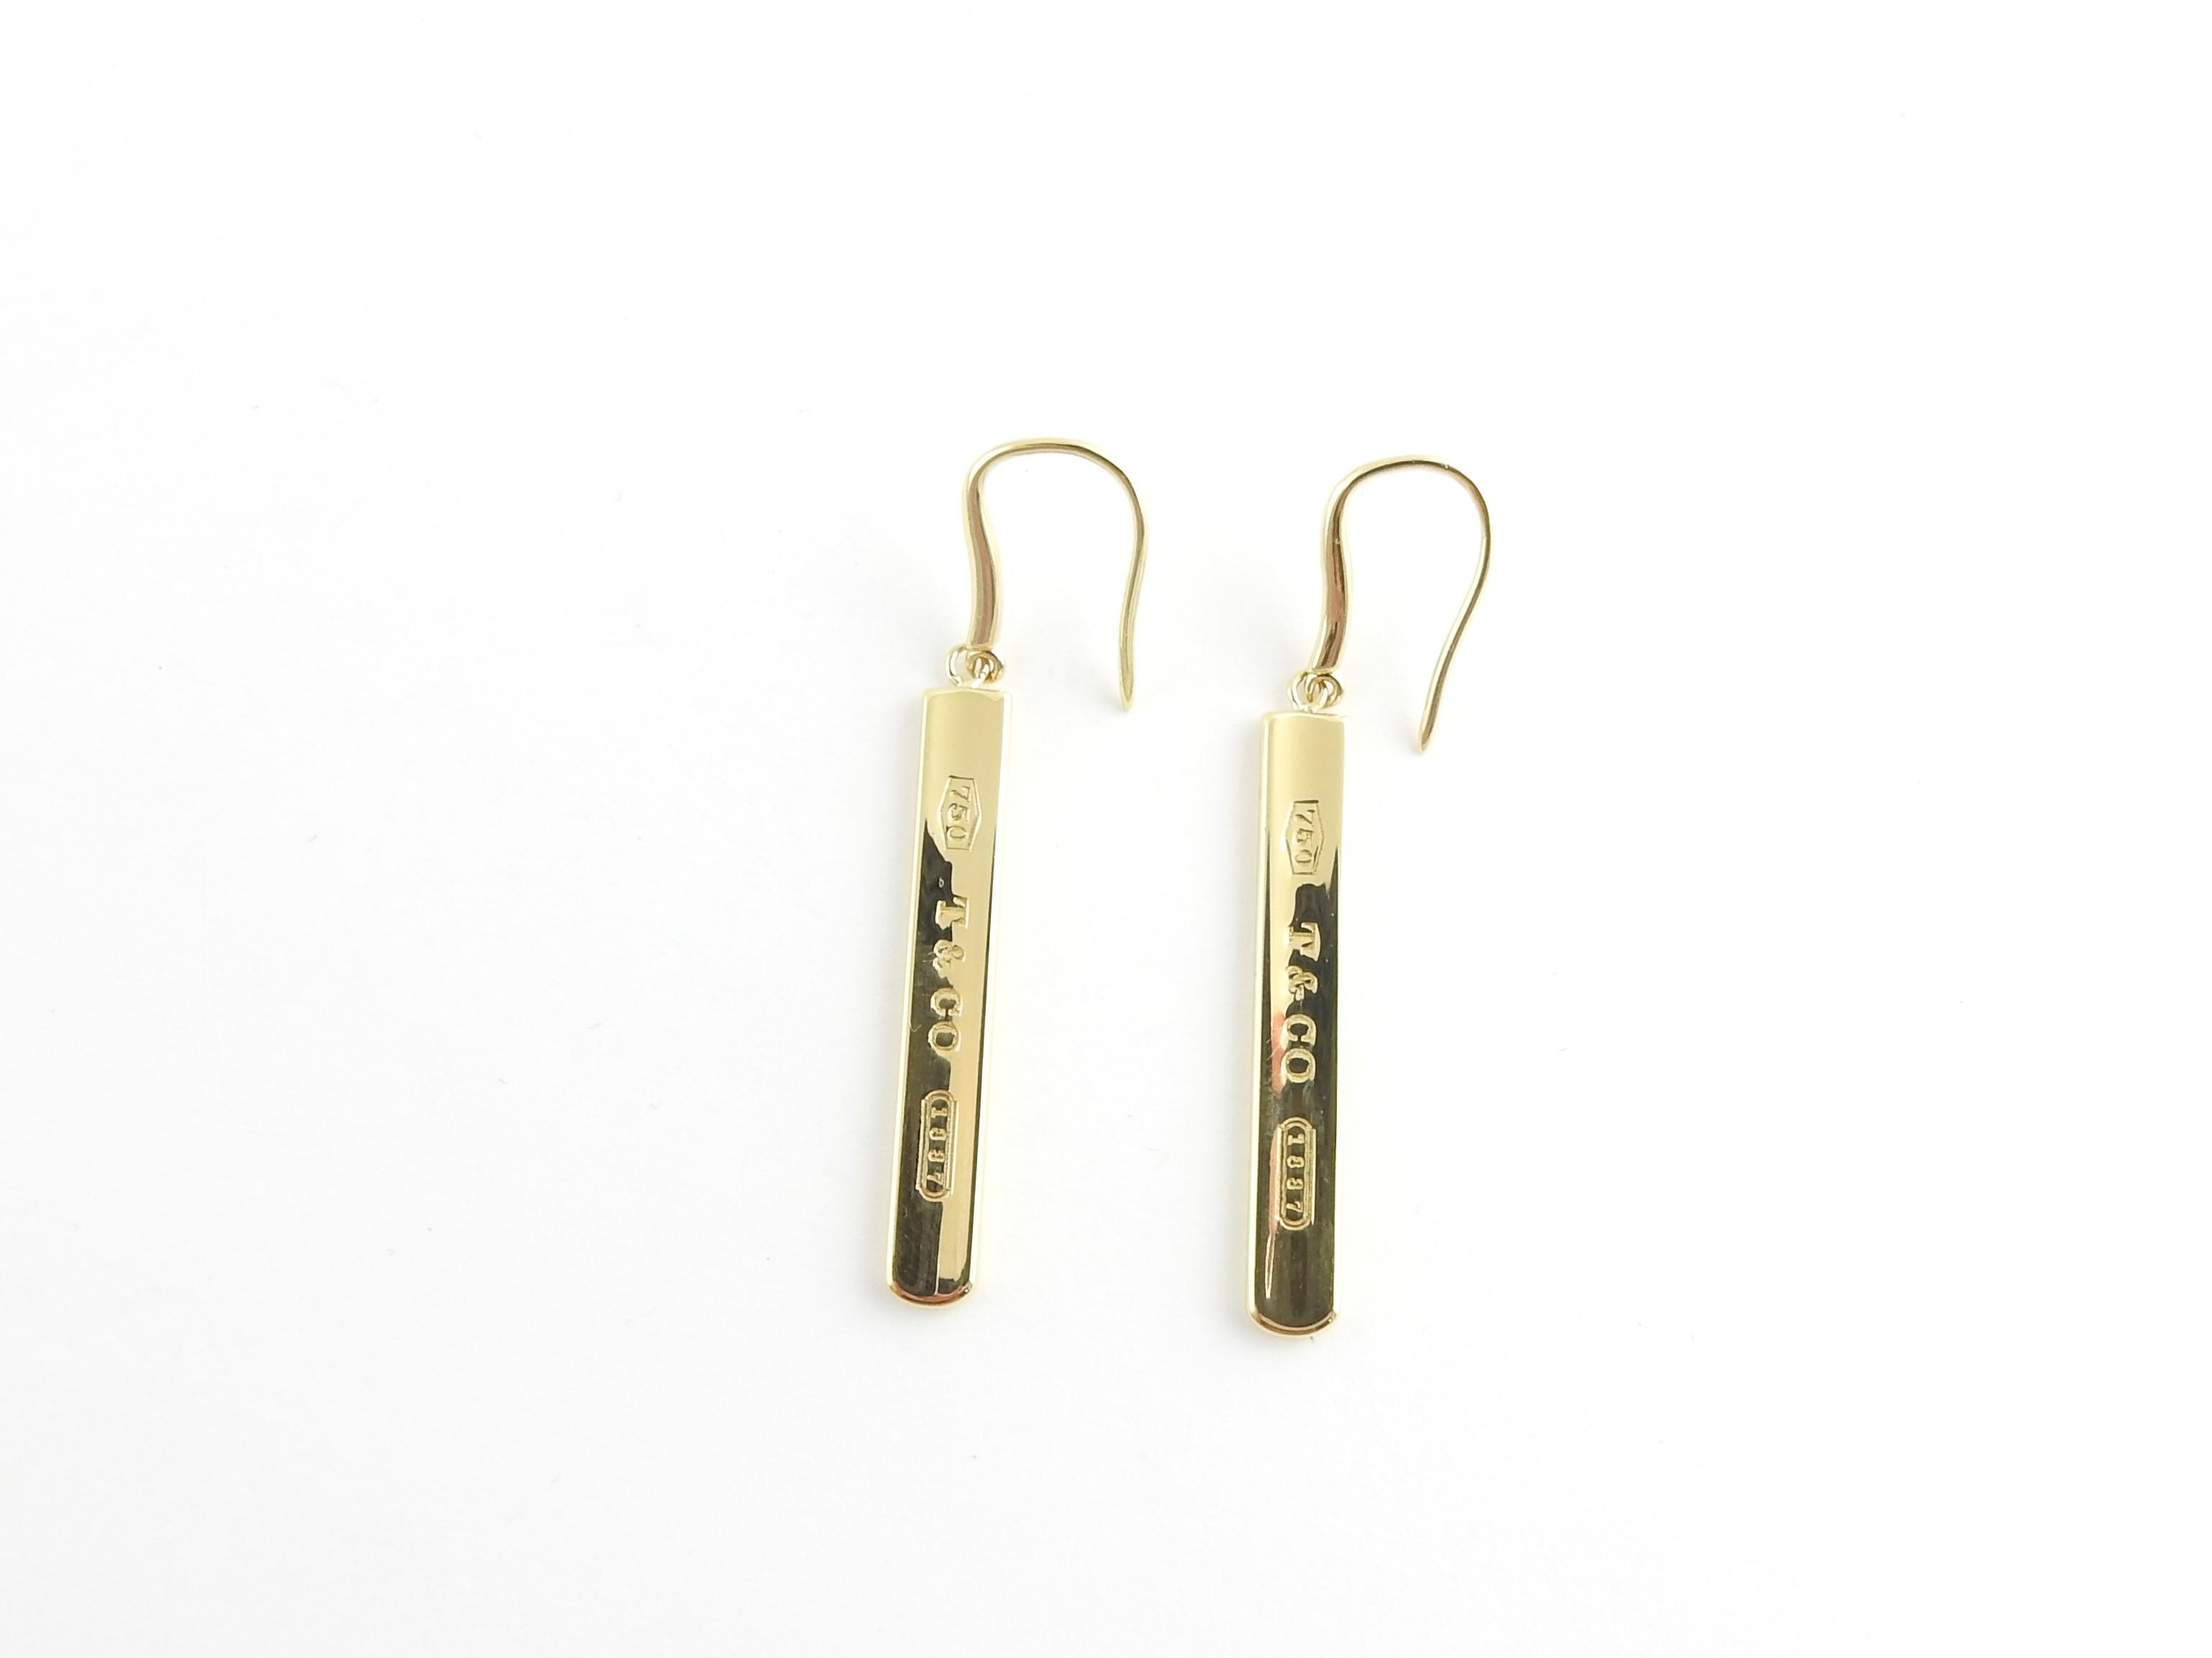 2003 Tiffany & Co. 18K Yellow Gold 1837 Long Bar Drop Earrings

These authentic Tiffany & Co. Earrings are set in 18K gold

Bar is approx. 1 5/16